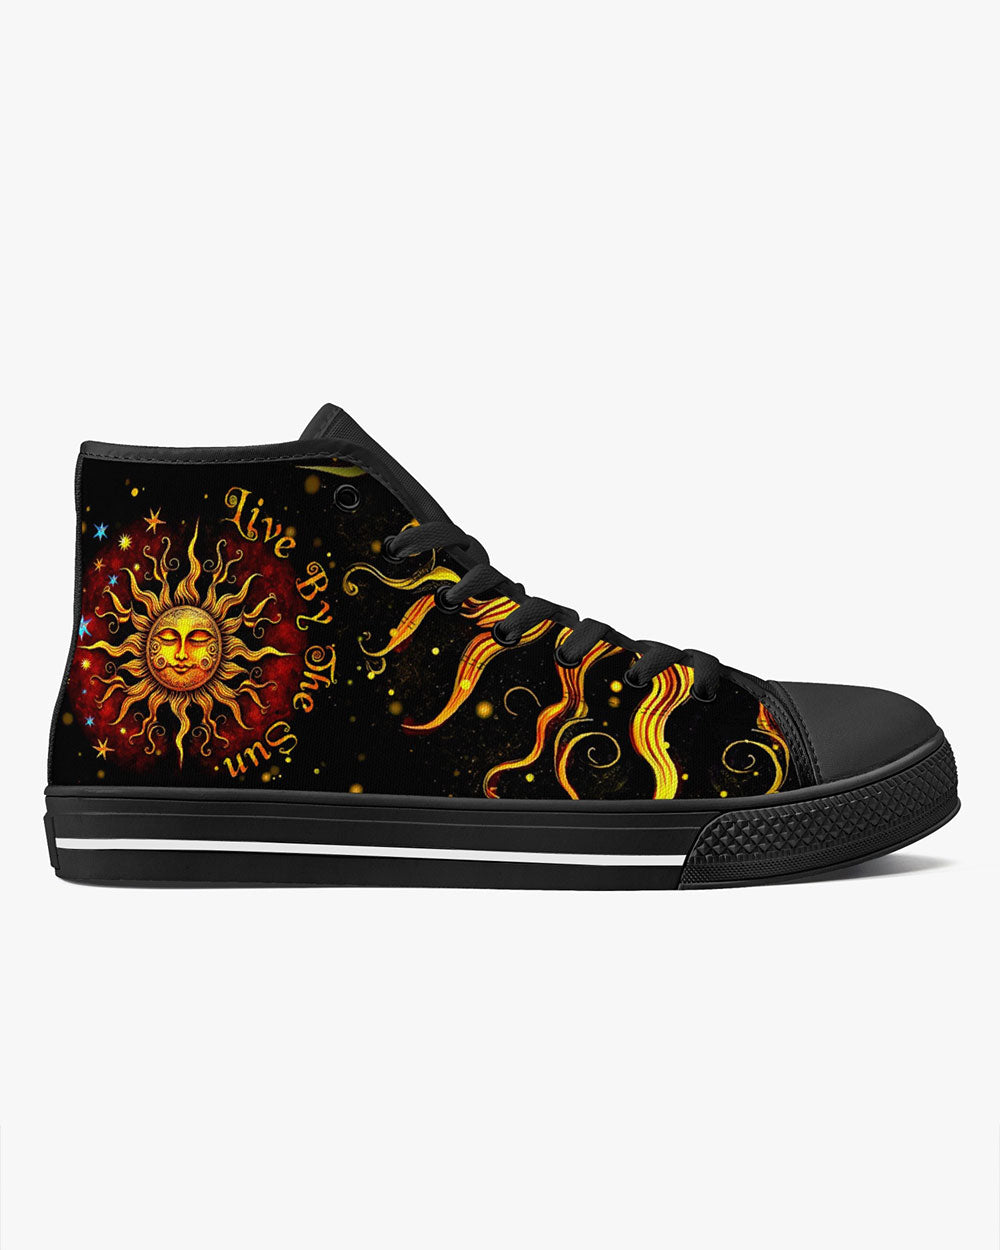 LIVE BY THE SUN HIGH TOP CANVAS SHOES - TYTM2303231